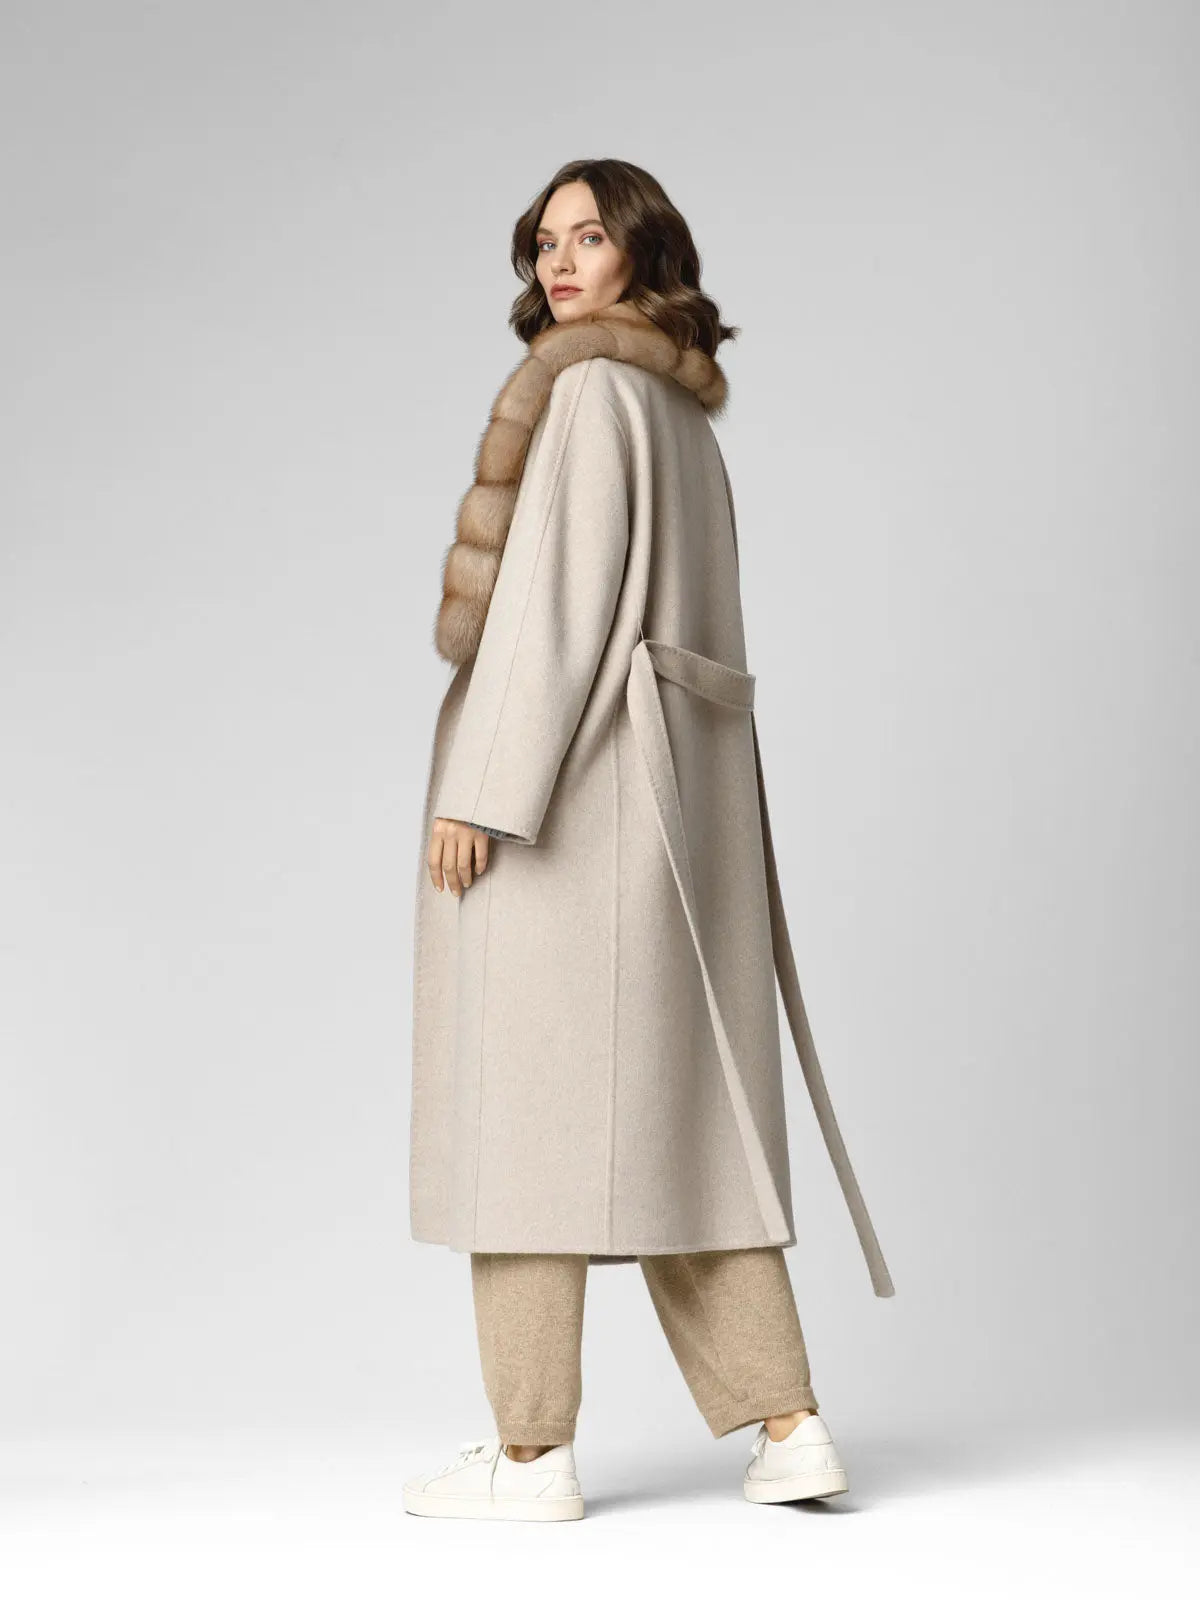 Marten cashmere coat with shawl collar